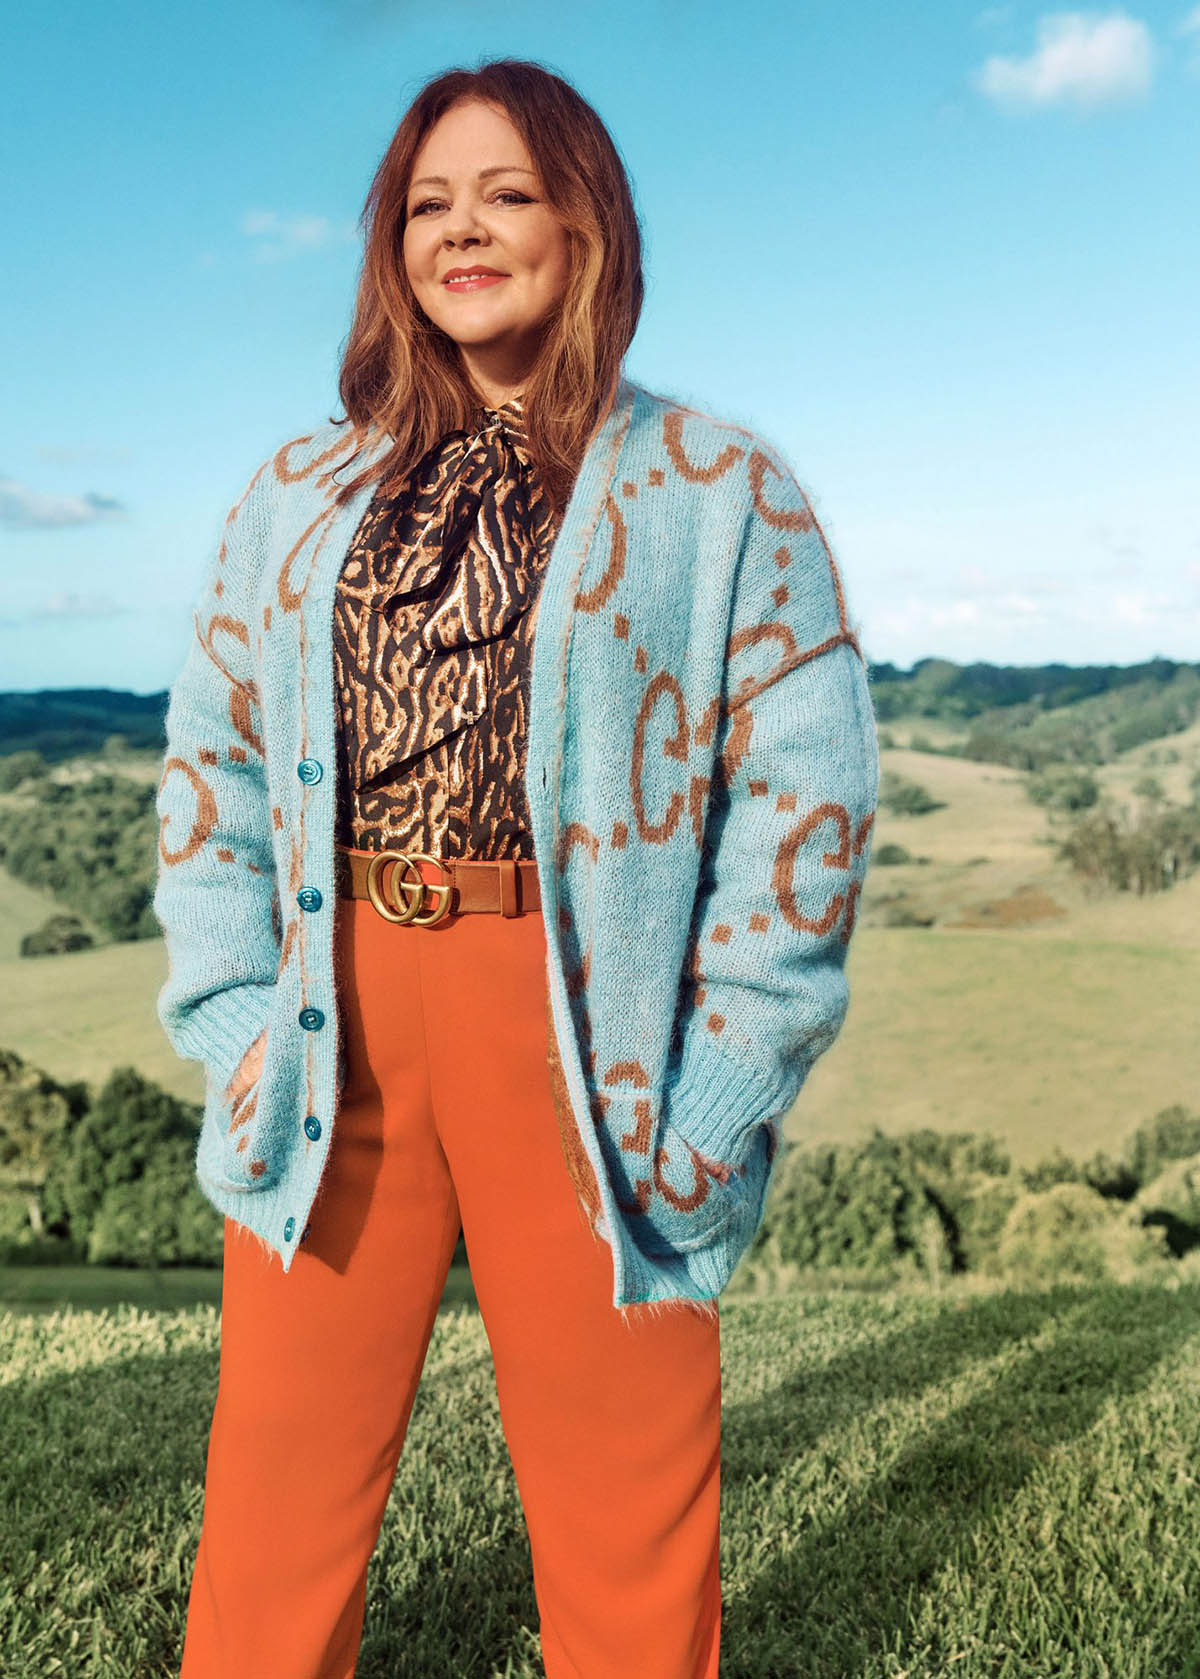 Melissa McCarthy covers InStyle US April 2021 by Charles